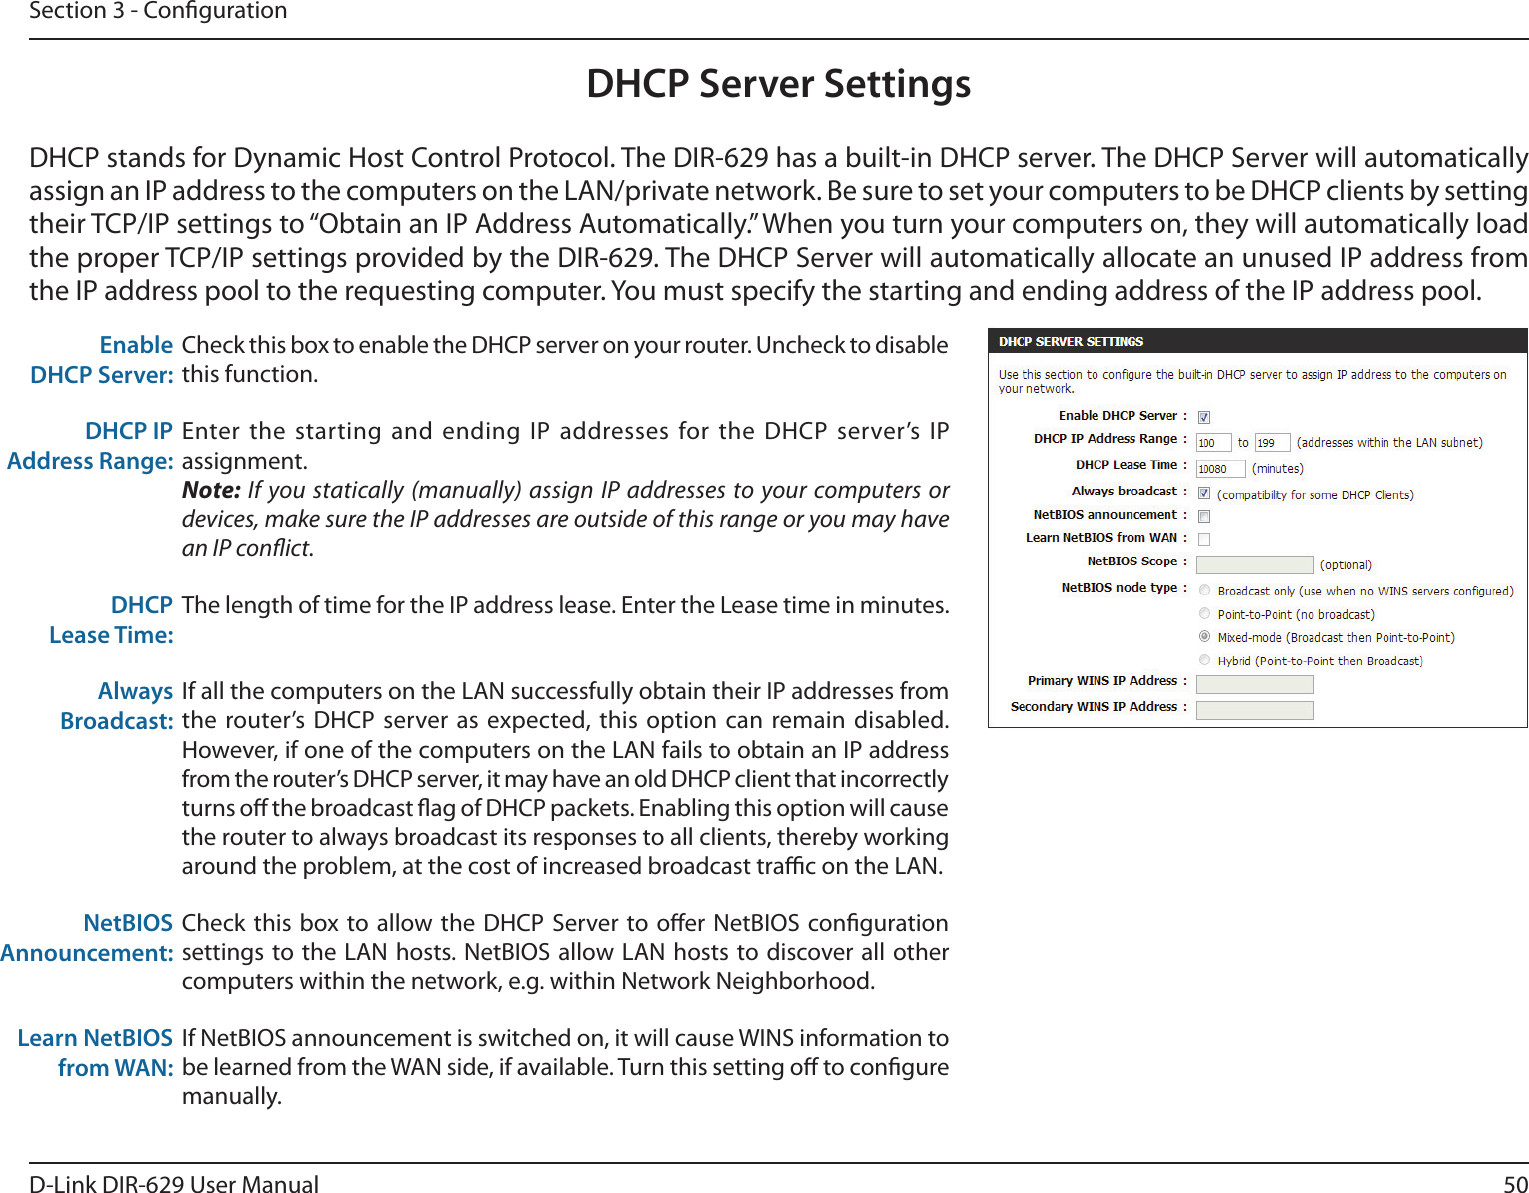 50D-Link DIR-629 User ManualSection 3 - CongurationDHCP Server Settingstheir TCP/IP settings to “Obtain an IP Address Automatically.” When you turn your computers on, they will automatically load Enable DHCP Server:Check this box to enable the DHCP server on your router. Uncheck to disable this function.DHCP IP Address Range:Enter the starting and ending IP addresses for the DHCP server’s IP assignment.Note: If you statically (manually) assign IP addresses to your computers or devices, make sure the IP addresses are outside of this range or you may have an IP conict. DHCP Lease Time:The length of time for the IP address lease. Enter the Lease time in minutes.Always Broadcast:If all the computers on the LAN successfully obtain their IP addresses from the router’s DHCP server as expected, this option can remain disabled. However, if one of the computers on the LAN fails to obtain an IP address from the router’s DHCP server, it may have an old DHCP client that incorrectly turns o the broadcast ag of DHCP packets. Enabling this option will cause the router to always broadcast its responses to all clients, thereby working around the problem, at the cost of increased broadcast trac on the LAN.NetBIOS Announcement:computers within the network, e.g. within Network Neighborhood.Learn NetBIOS from WAN:be learned from the WAN side, if available. Turn this setting o to congure manually.